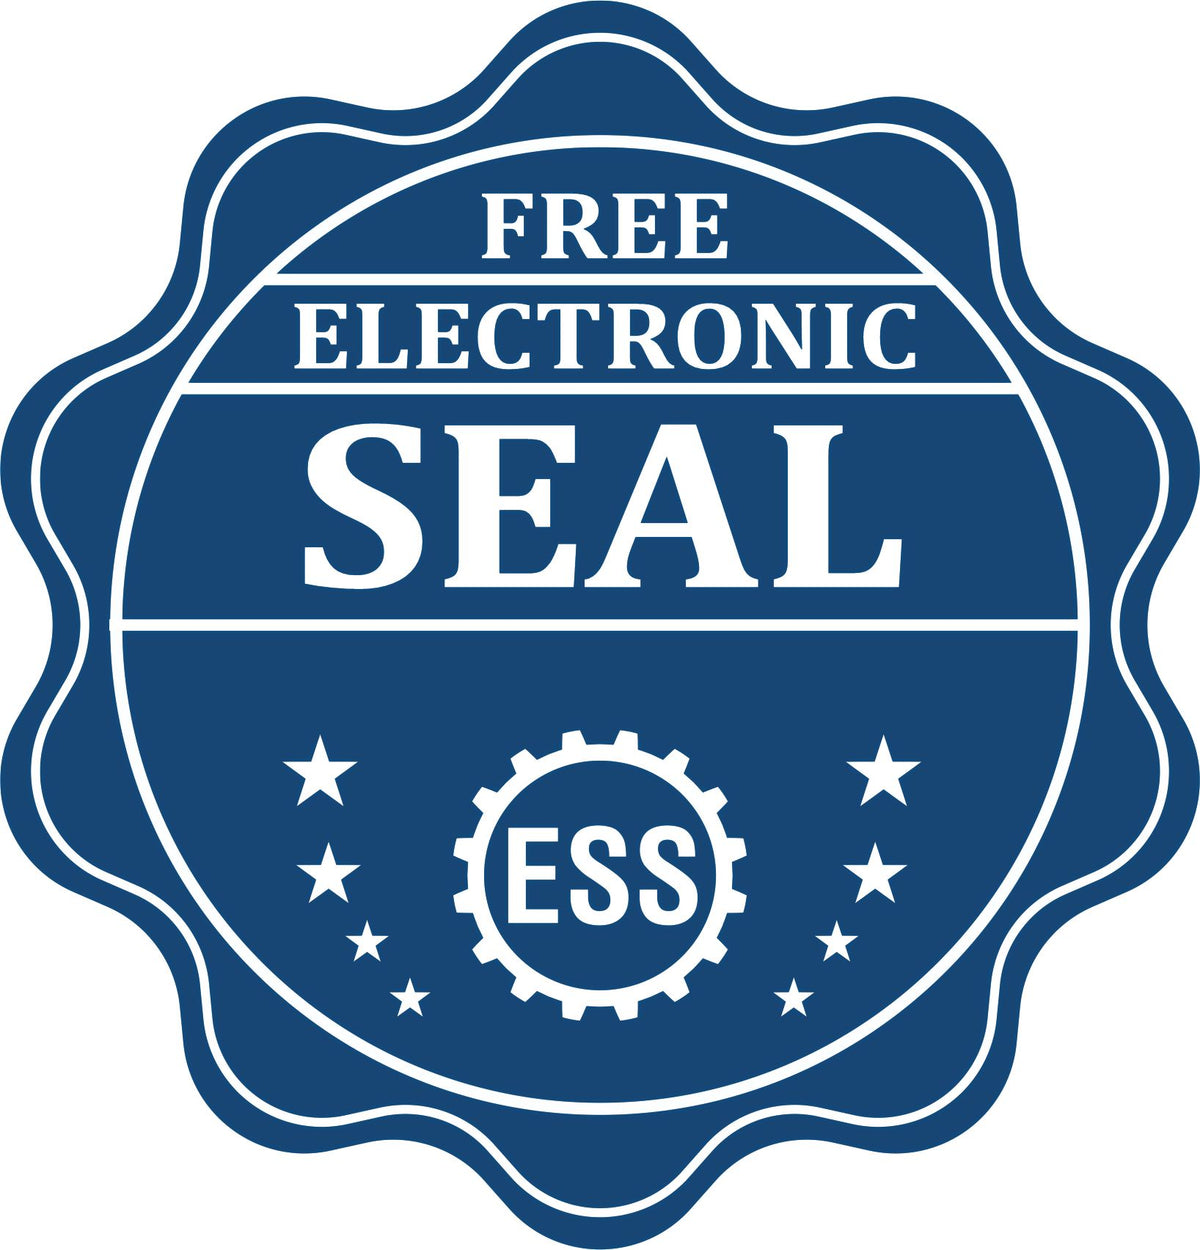 A badge showing a free electronic seal for the Soft Washington Professional Engineer Seal with stars and the ESS gear on the emblem.